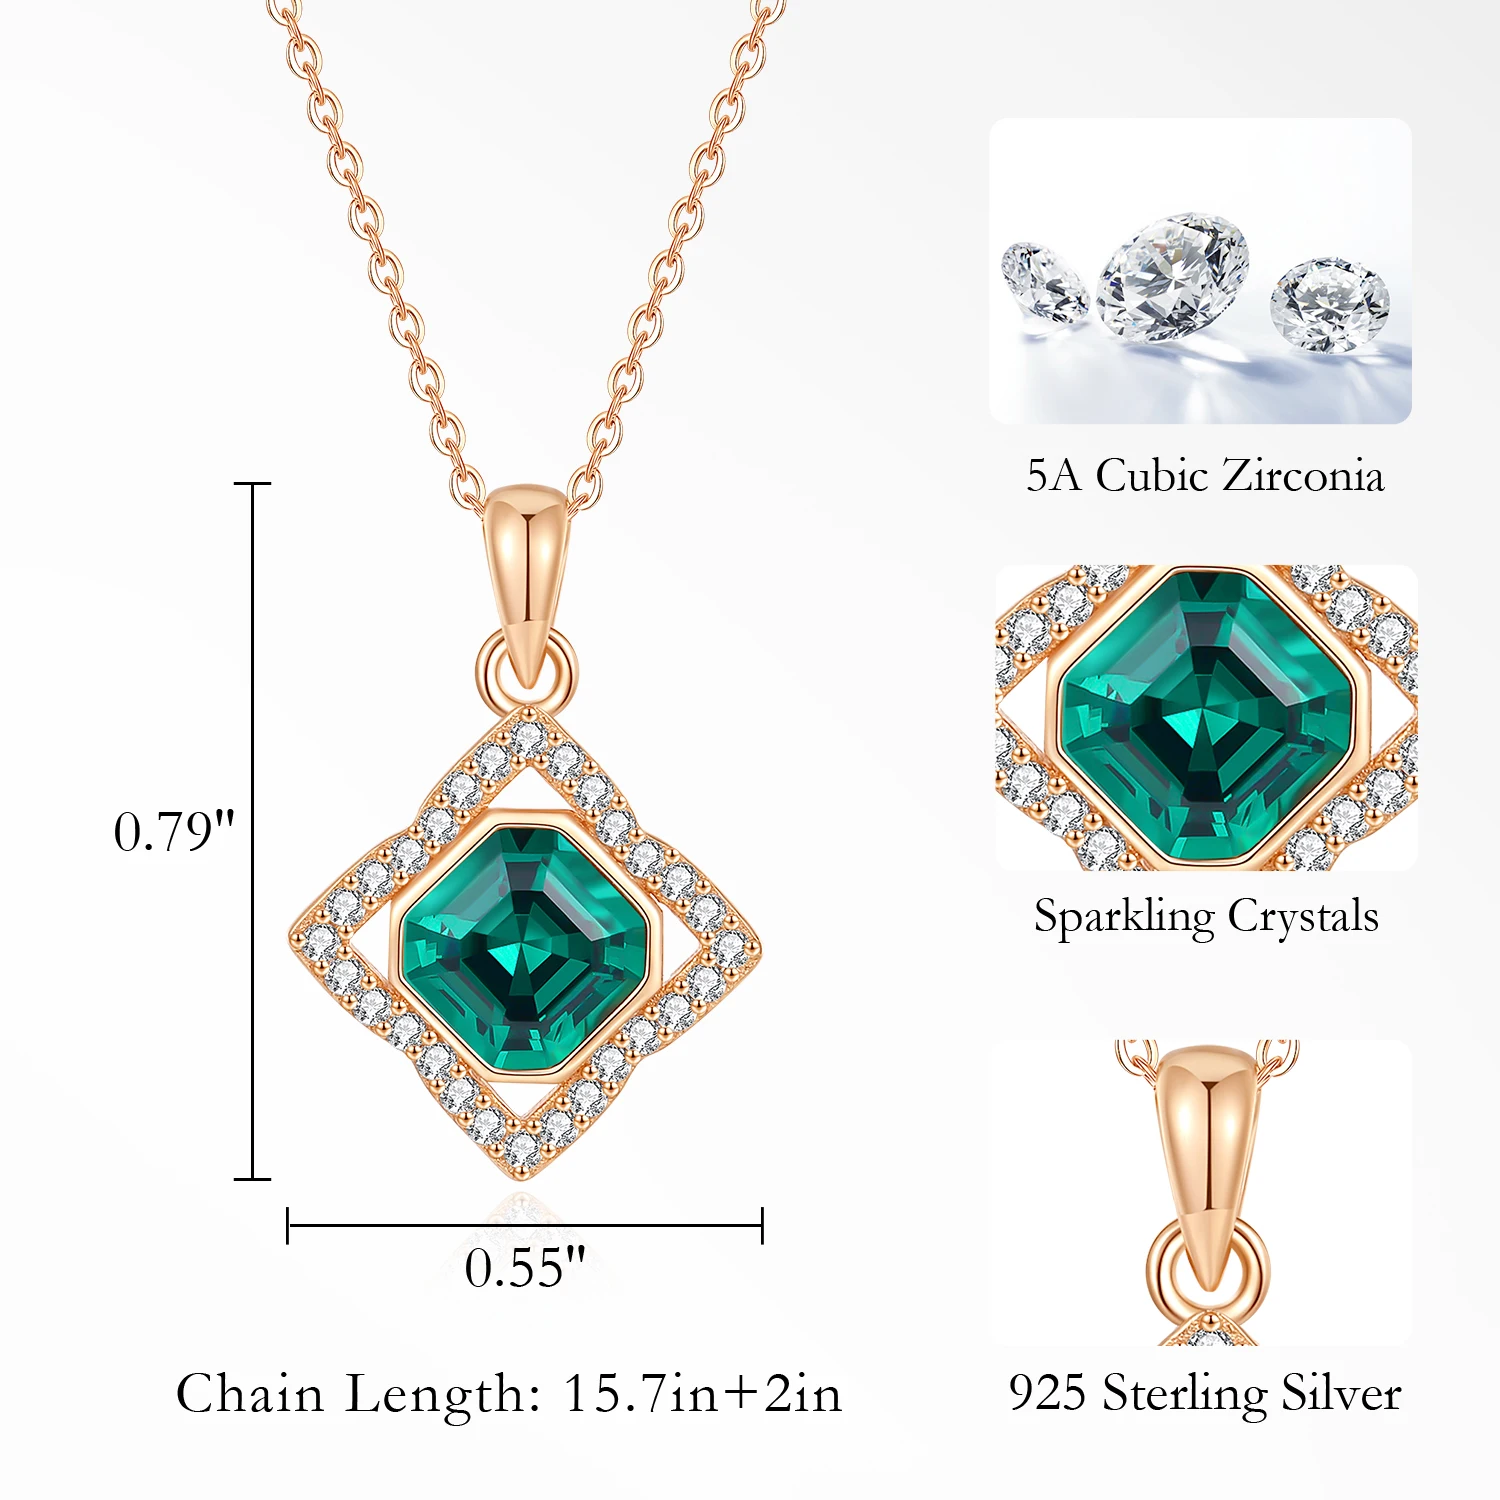 CDE YN1210 Fine Silver Jewelry Necklace 925 Silver Necklace Cubic Zirconia Crystal Denpant Necklace For Women